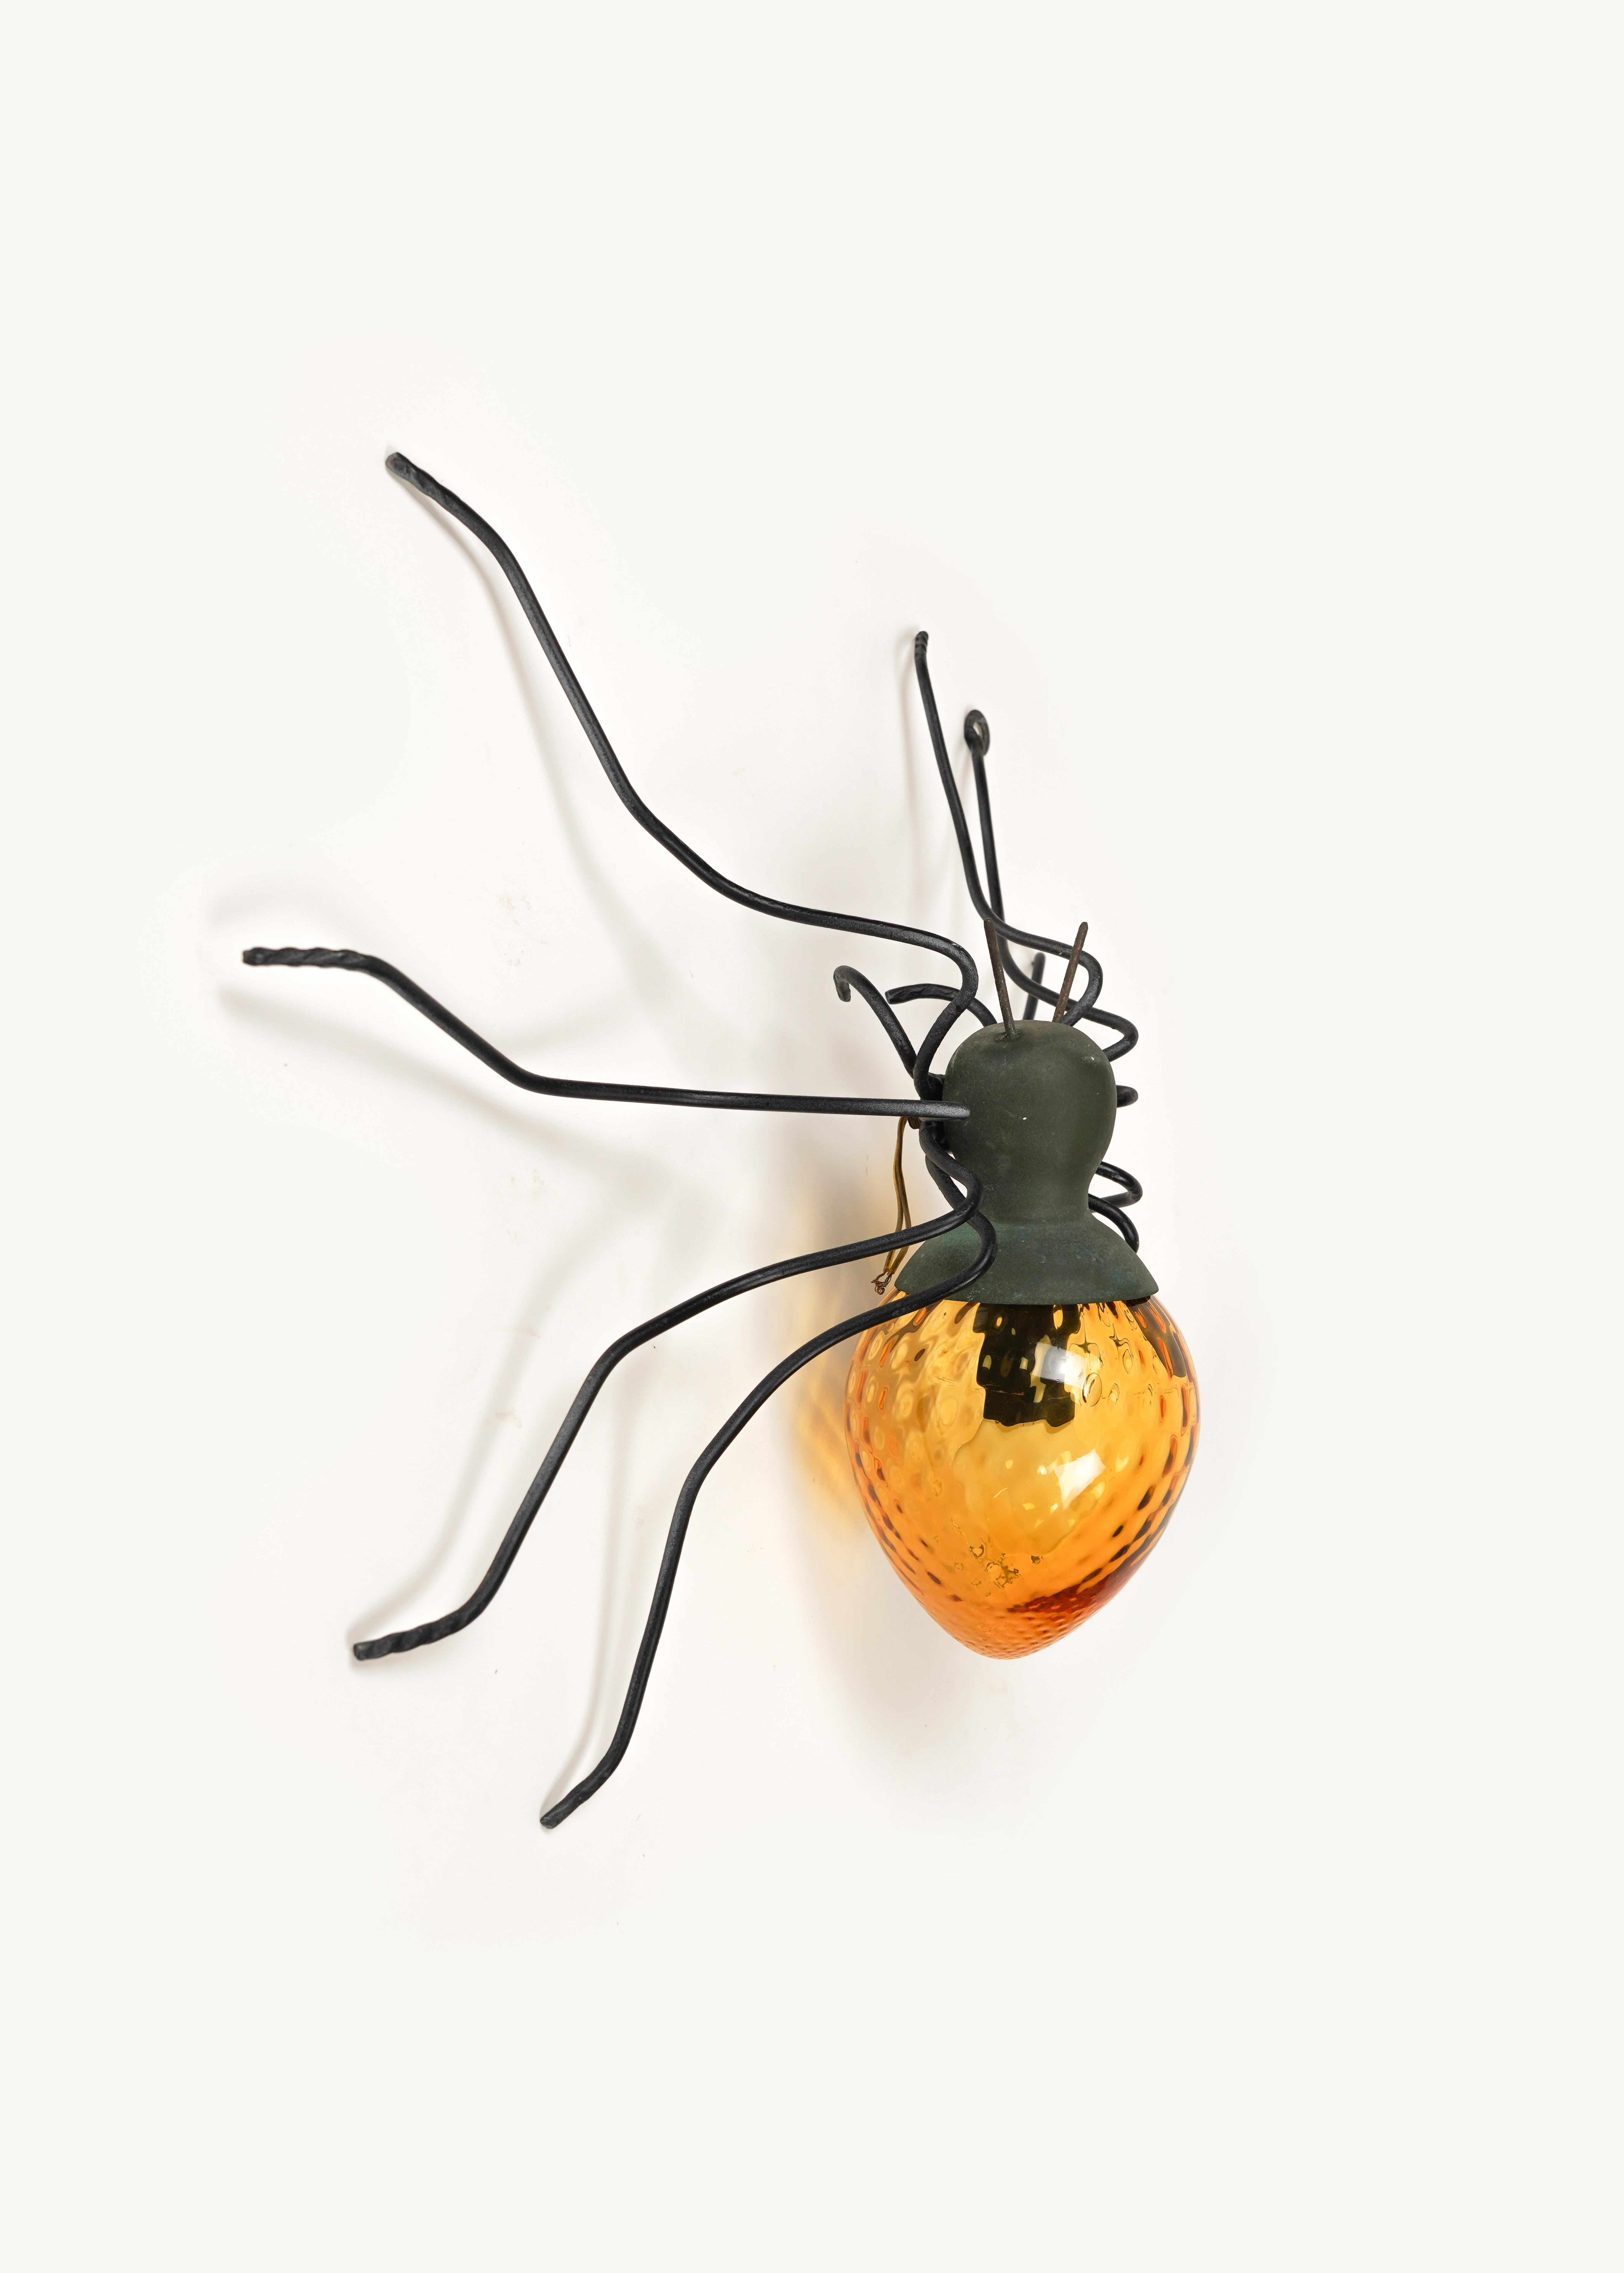 Italian Midcentury Spider Wall Lamp Sconce in Copper, Iron and Art Glass, Italy 1970s For Sale